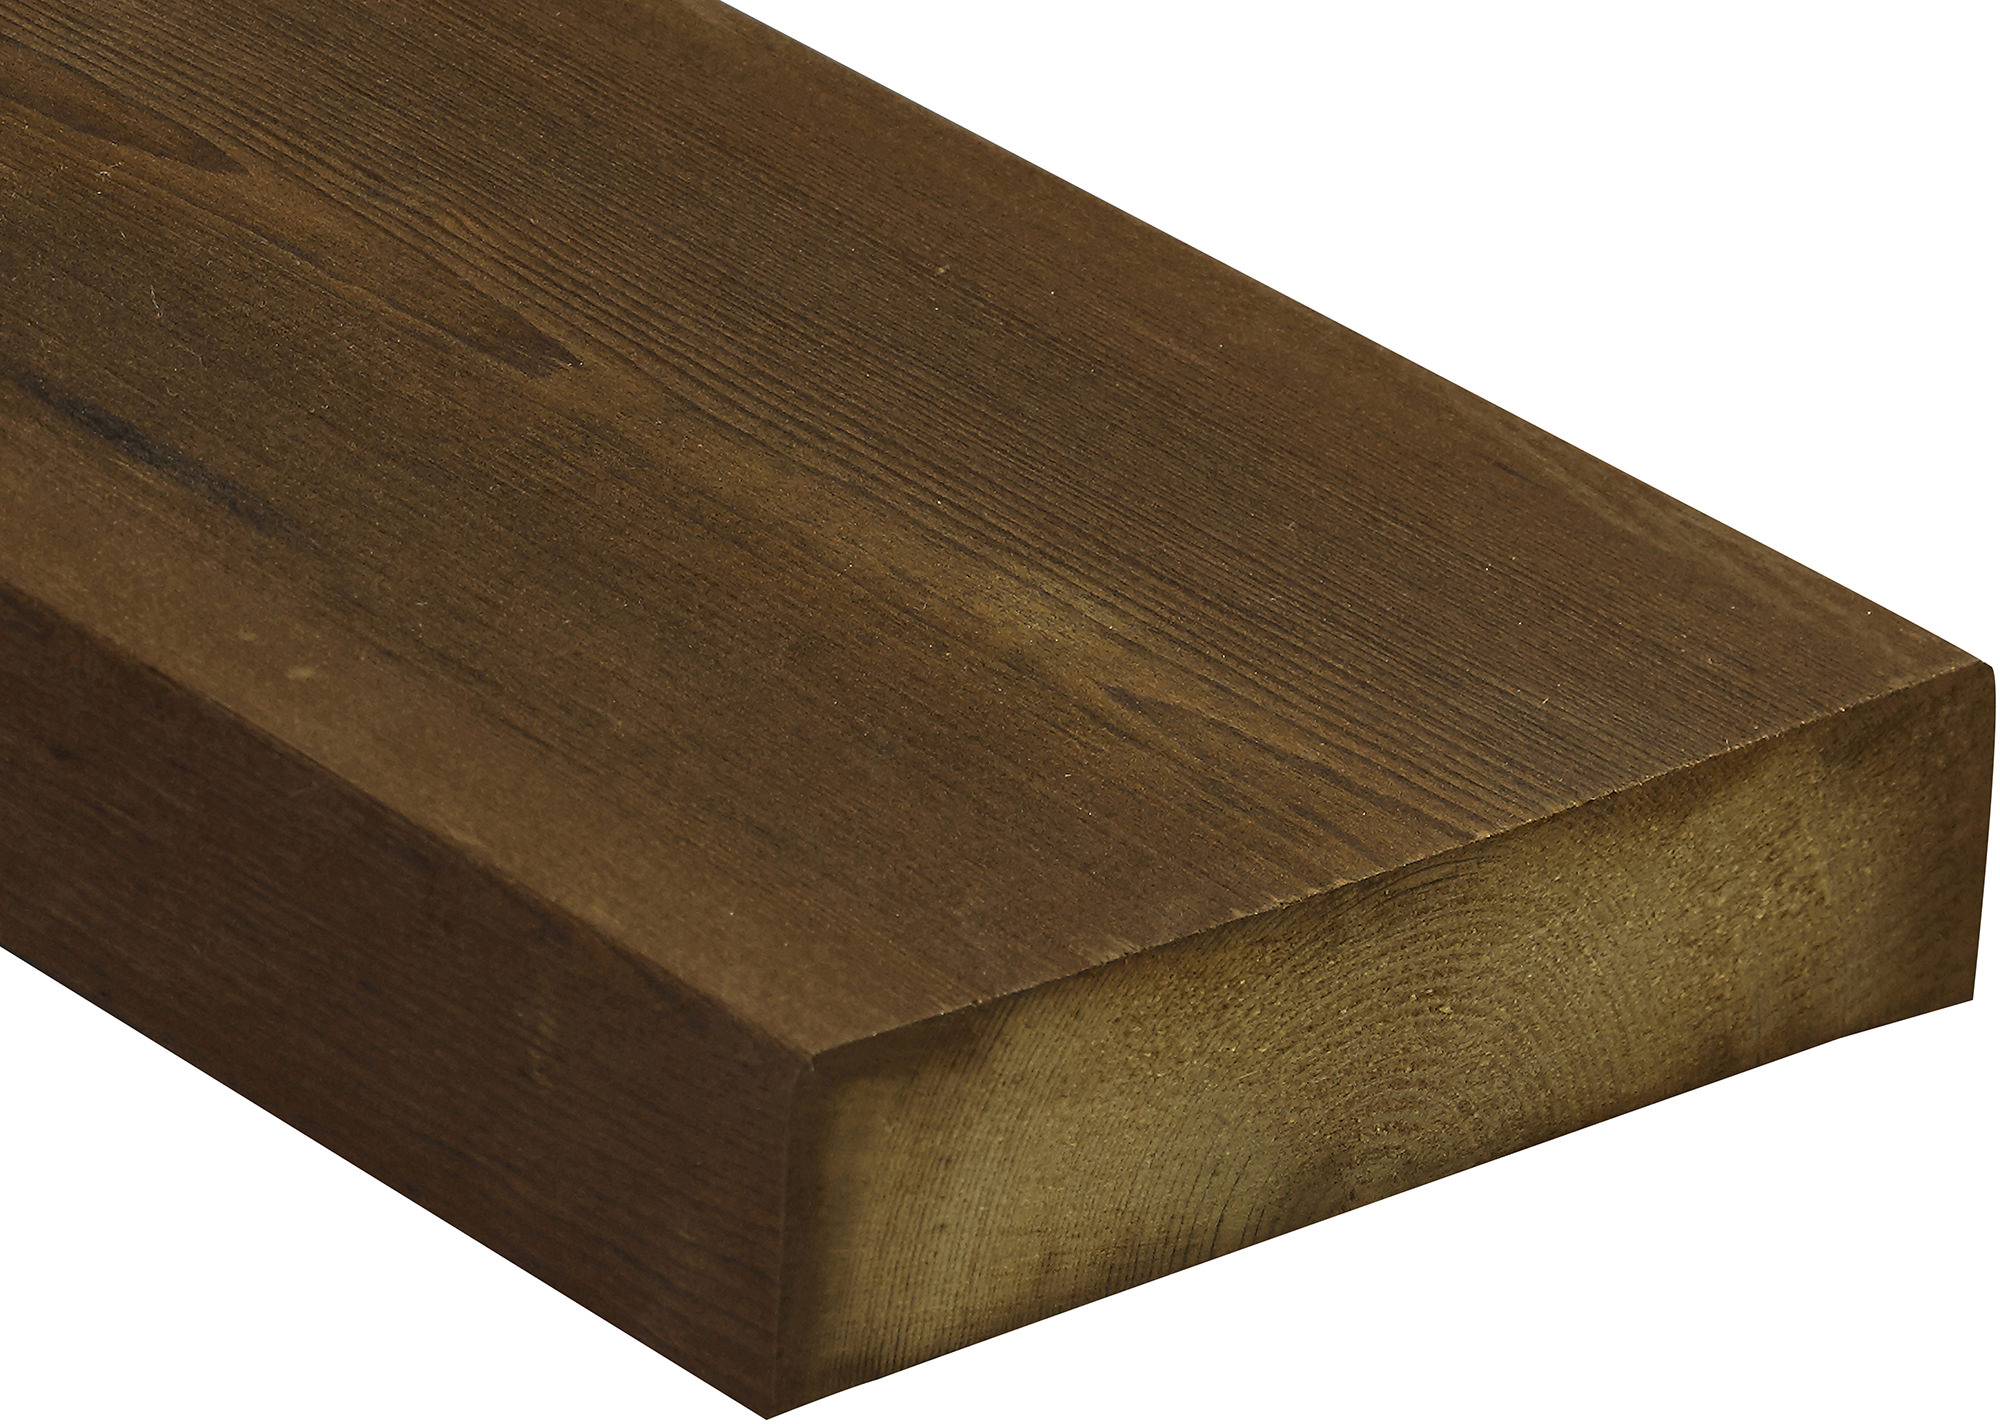 Kebony Character 28×120 mm terrace board smooth #1127